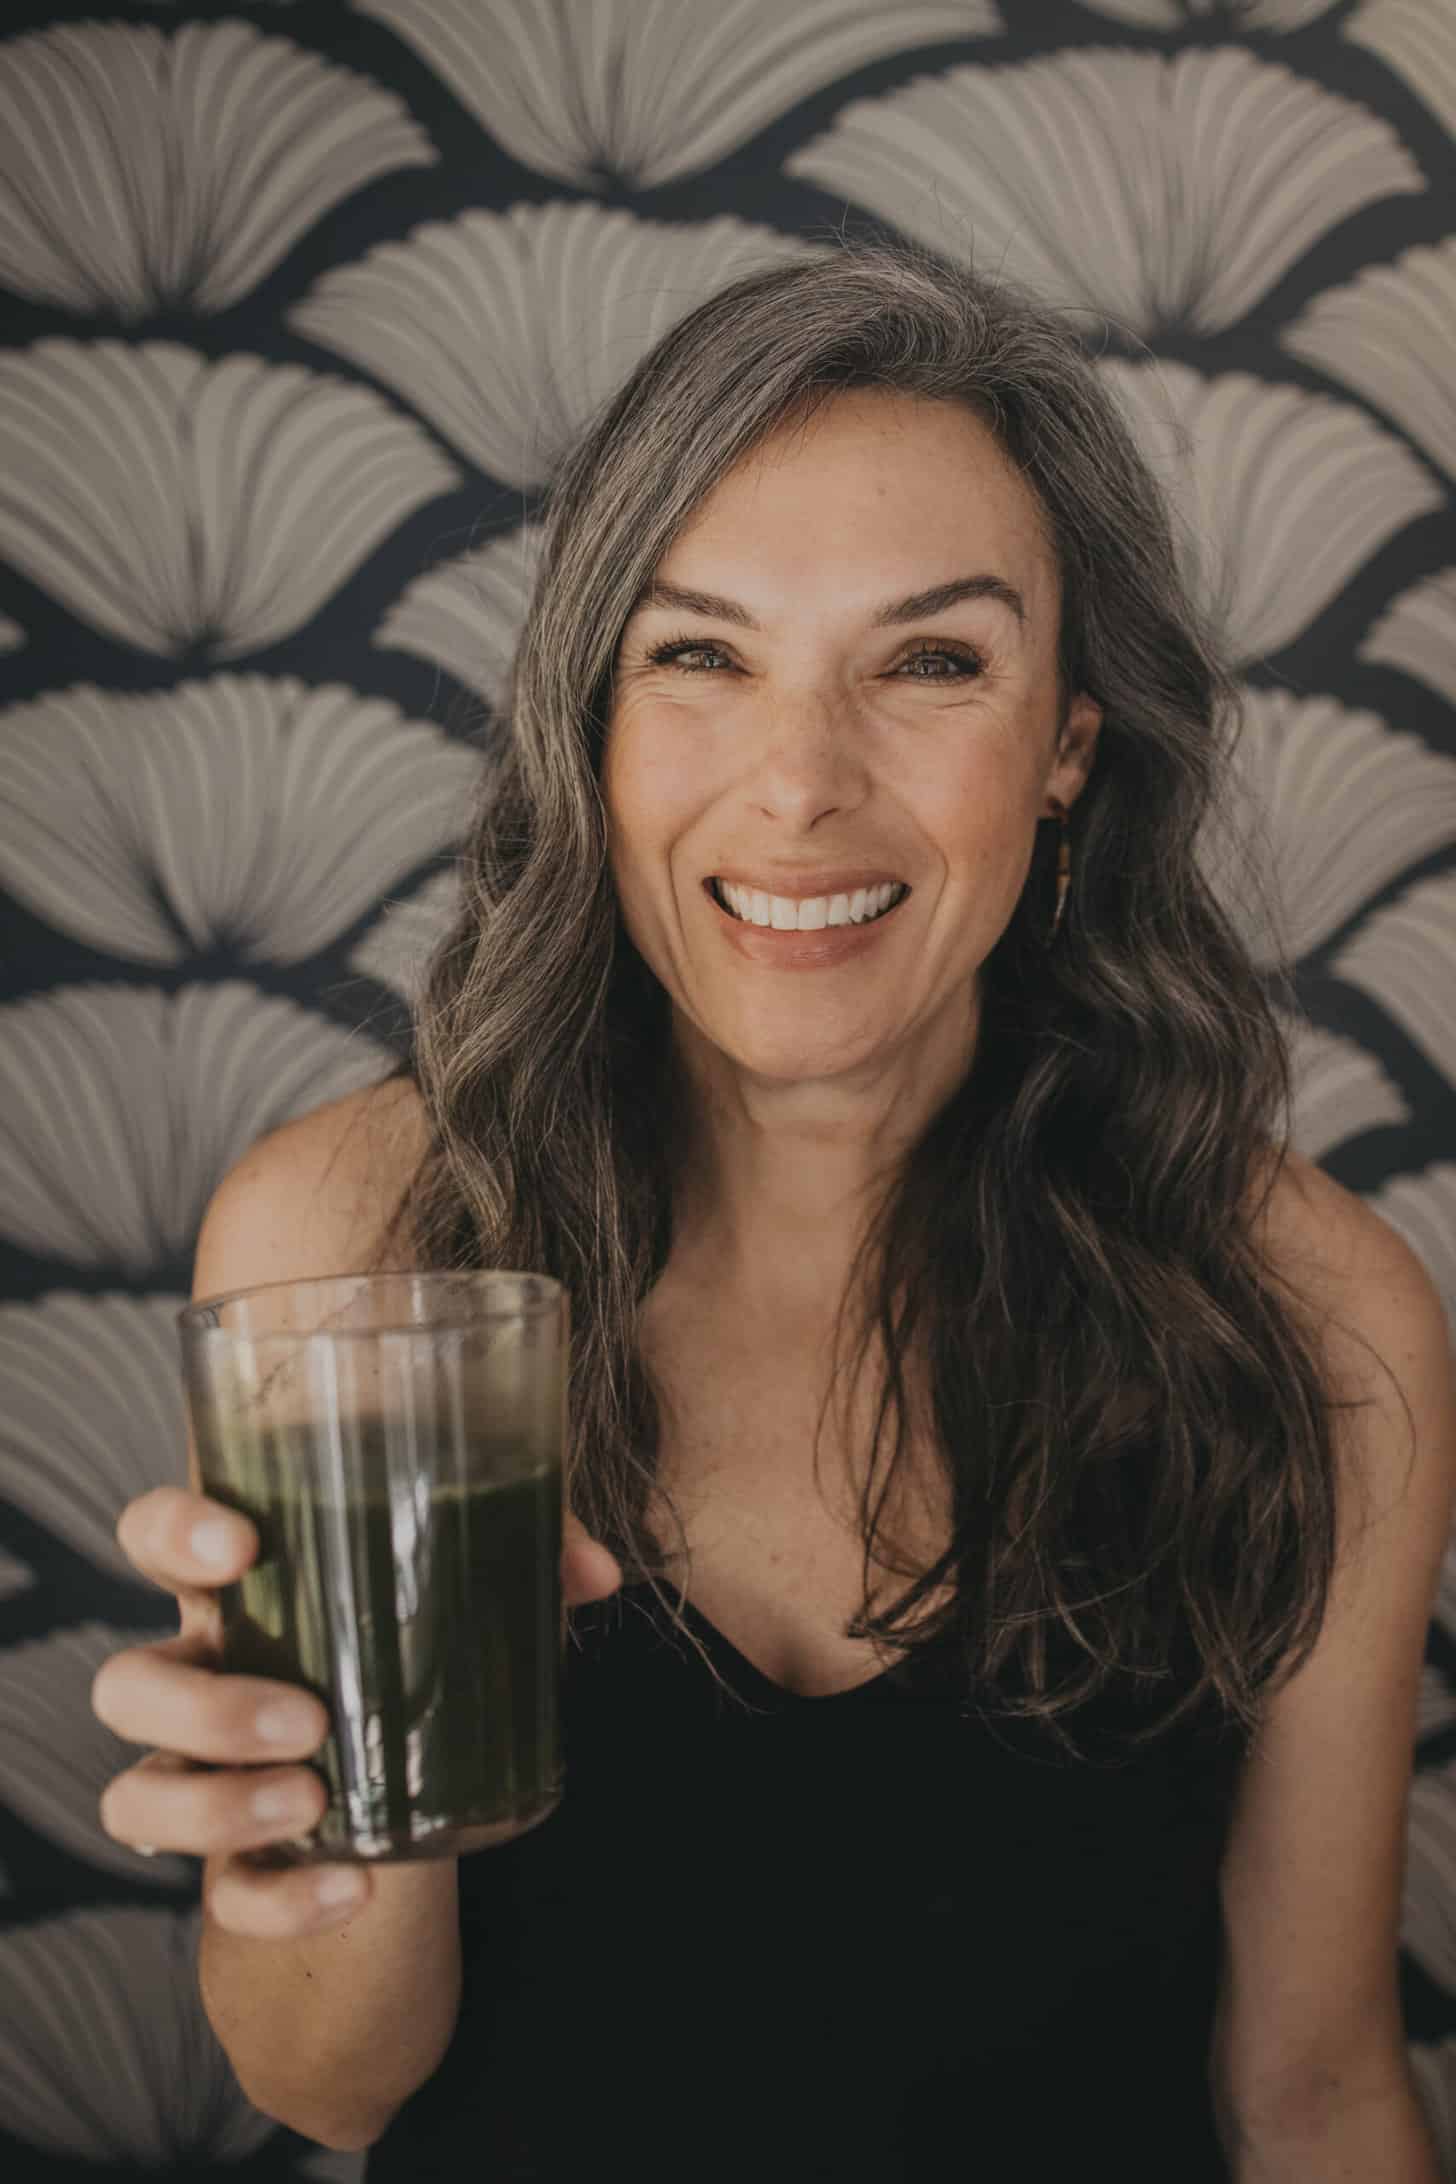 a woman holds up a glass of green juice